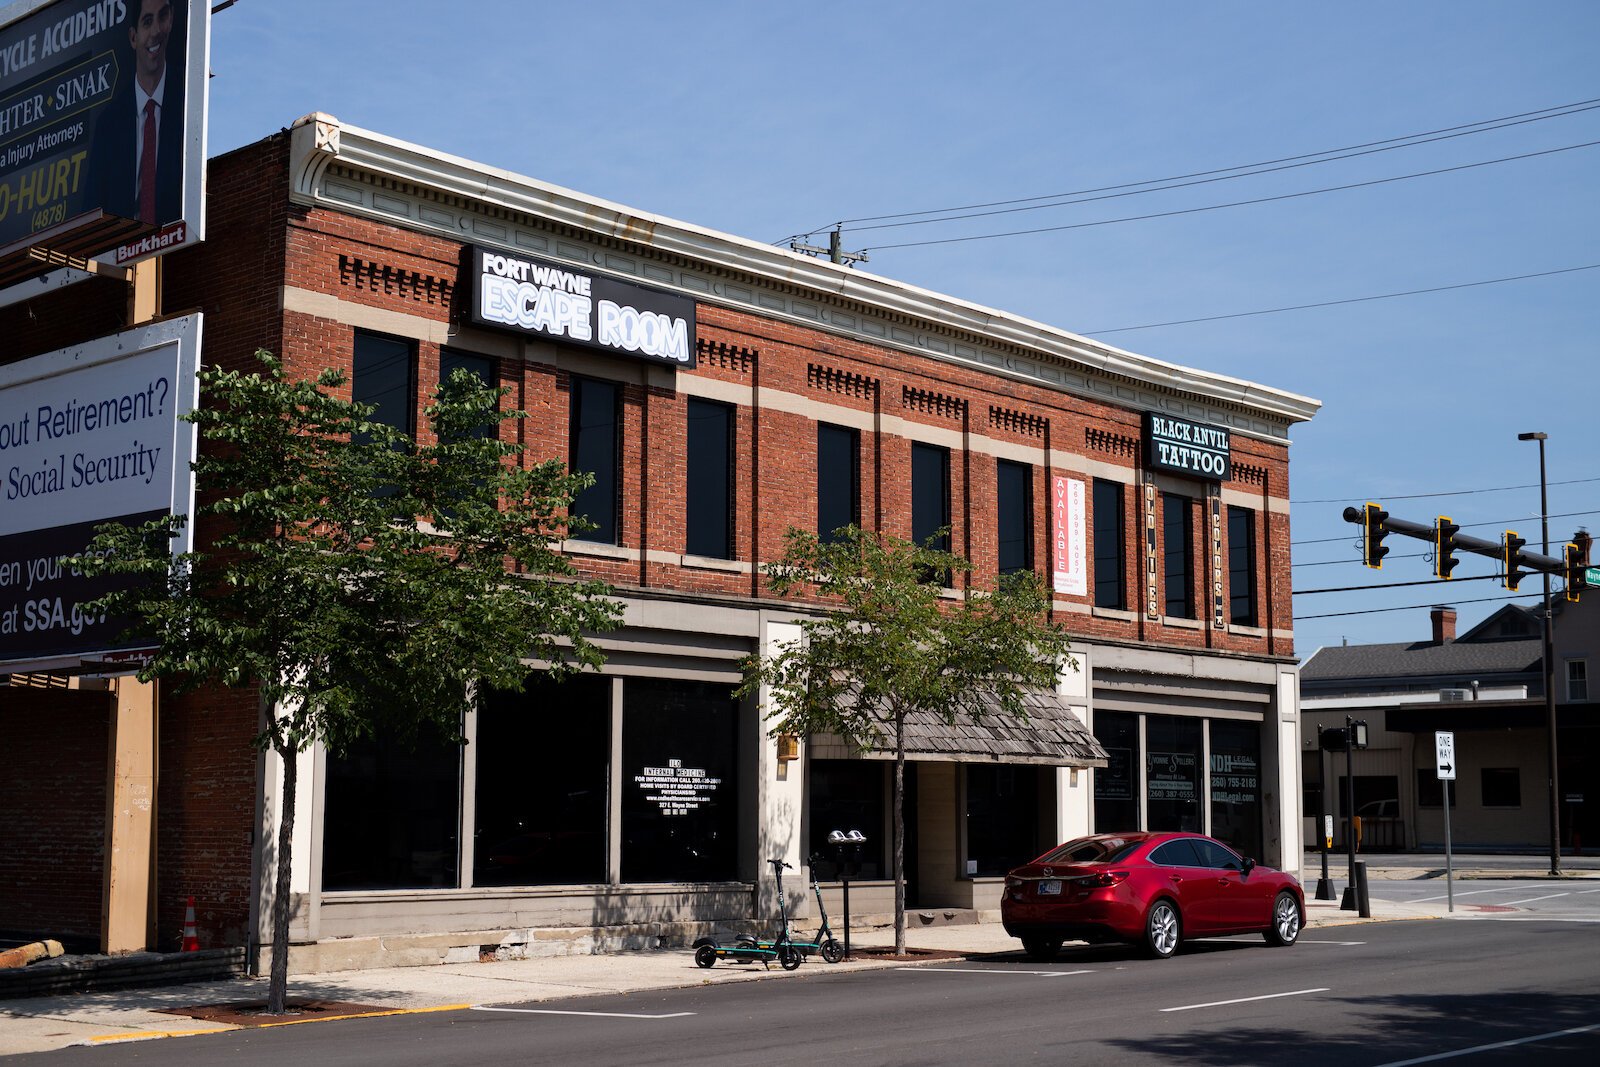 The Fort Wayne Escape Room is located in downtown Fort Wayne at 327 E. Wayne St., #200.